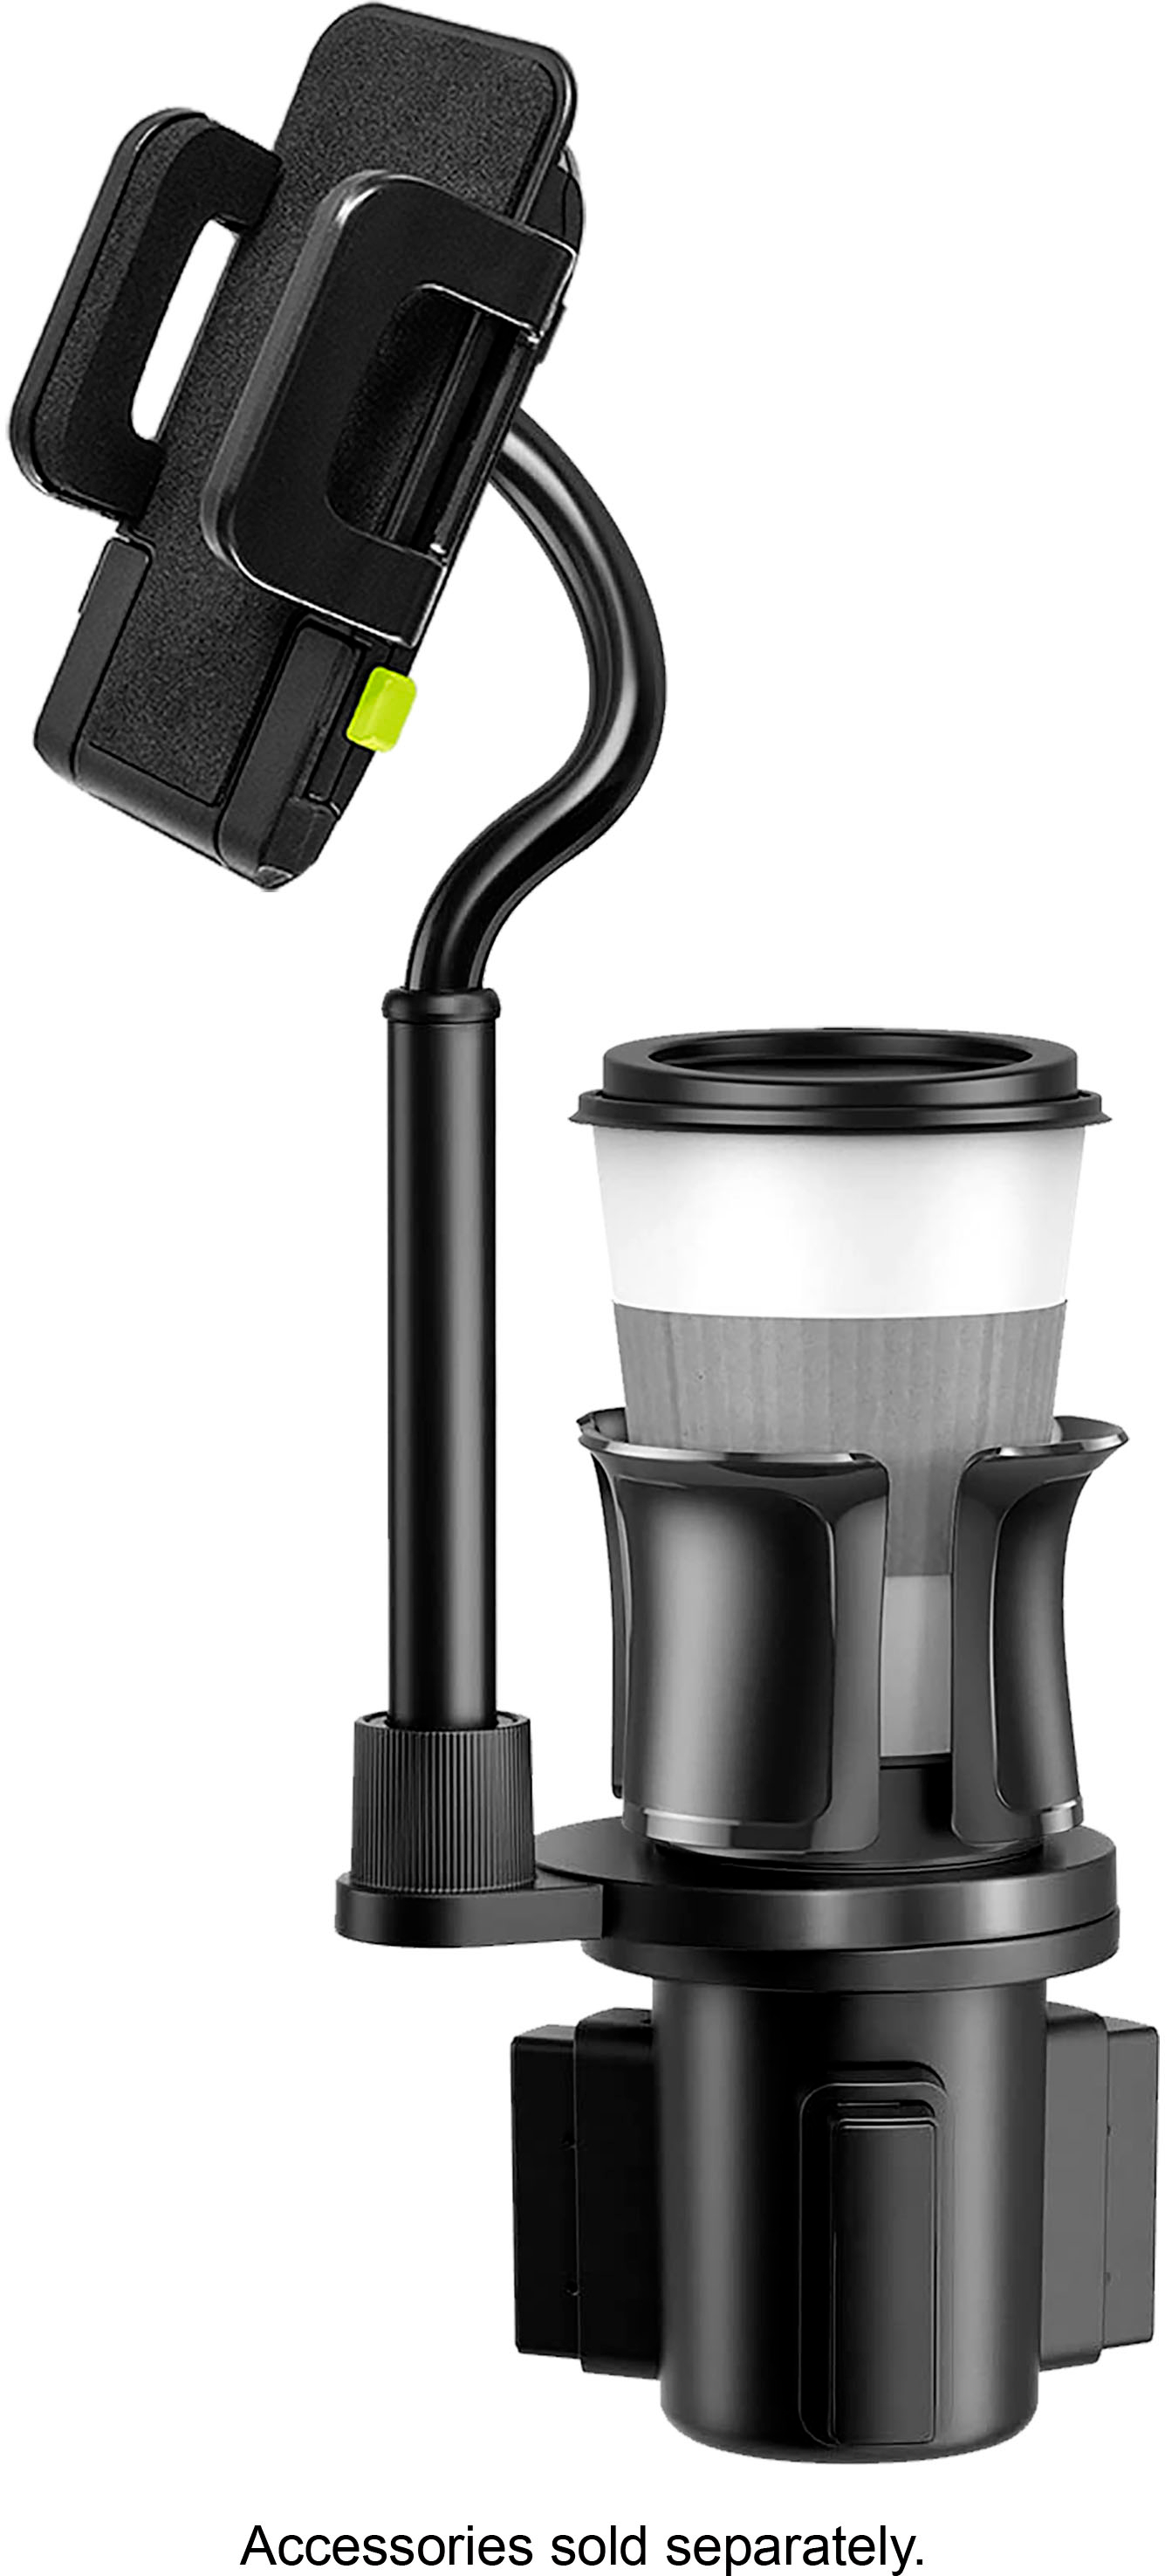 Unique Branded Cup With Direct Mount Support